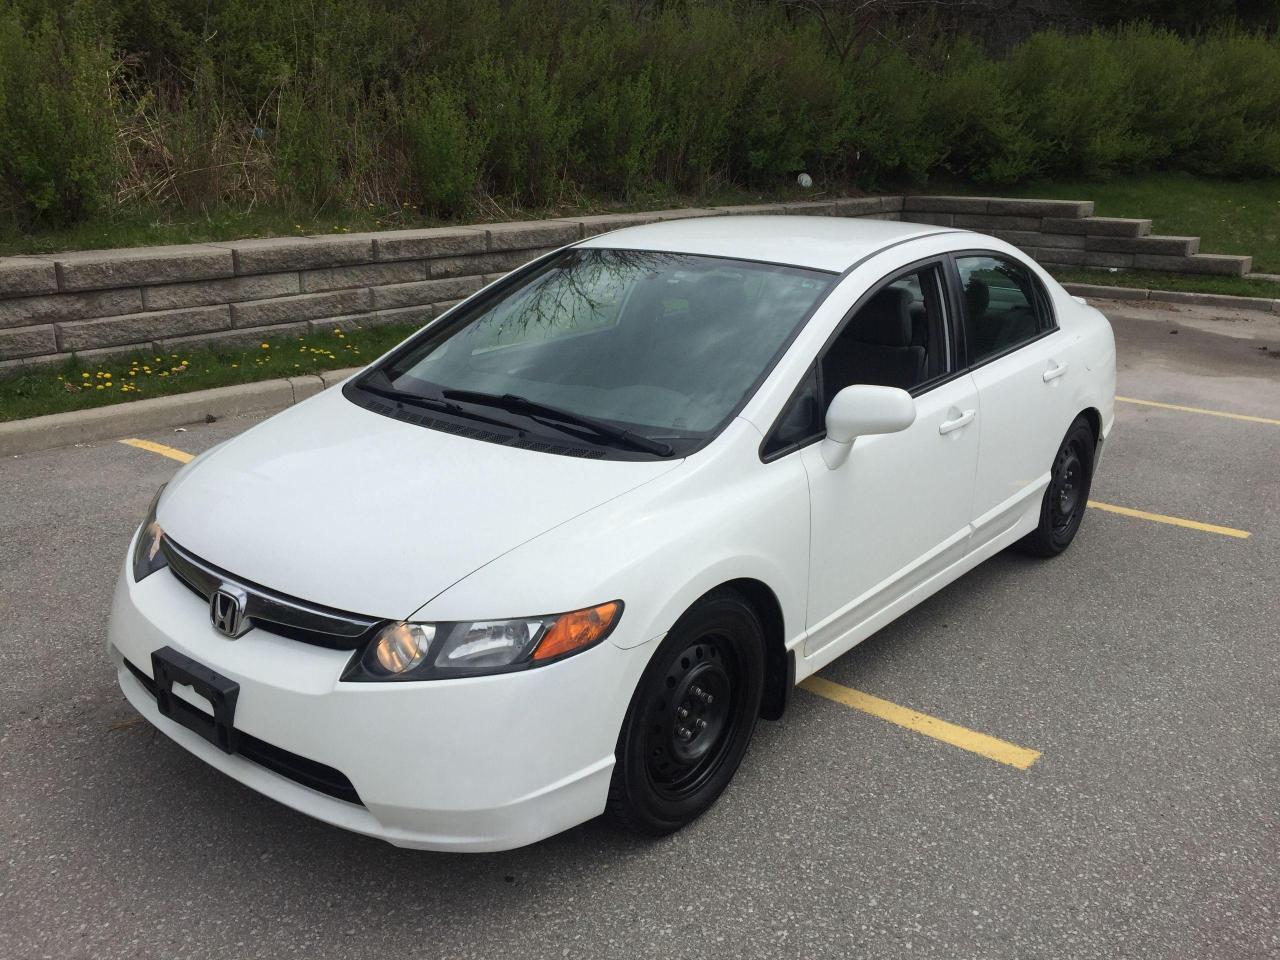 2008 Honda Civic LX-ONLY 91,541 KMS! 1 FEMALE OWNER-NO CLAIMS! - Photo #4